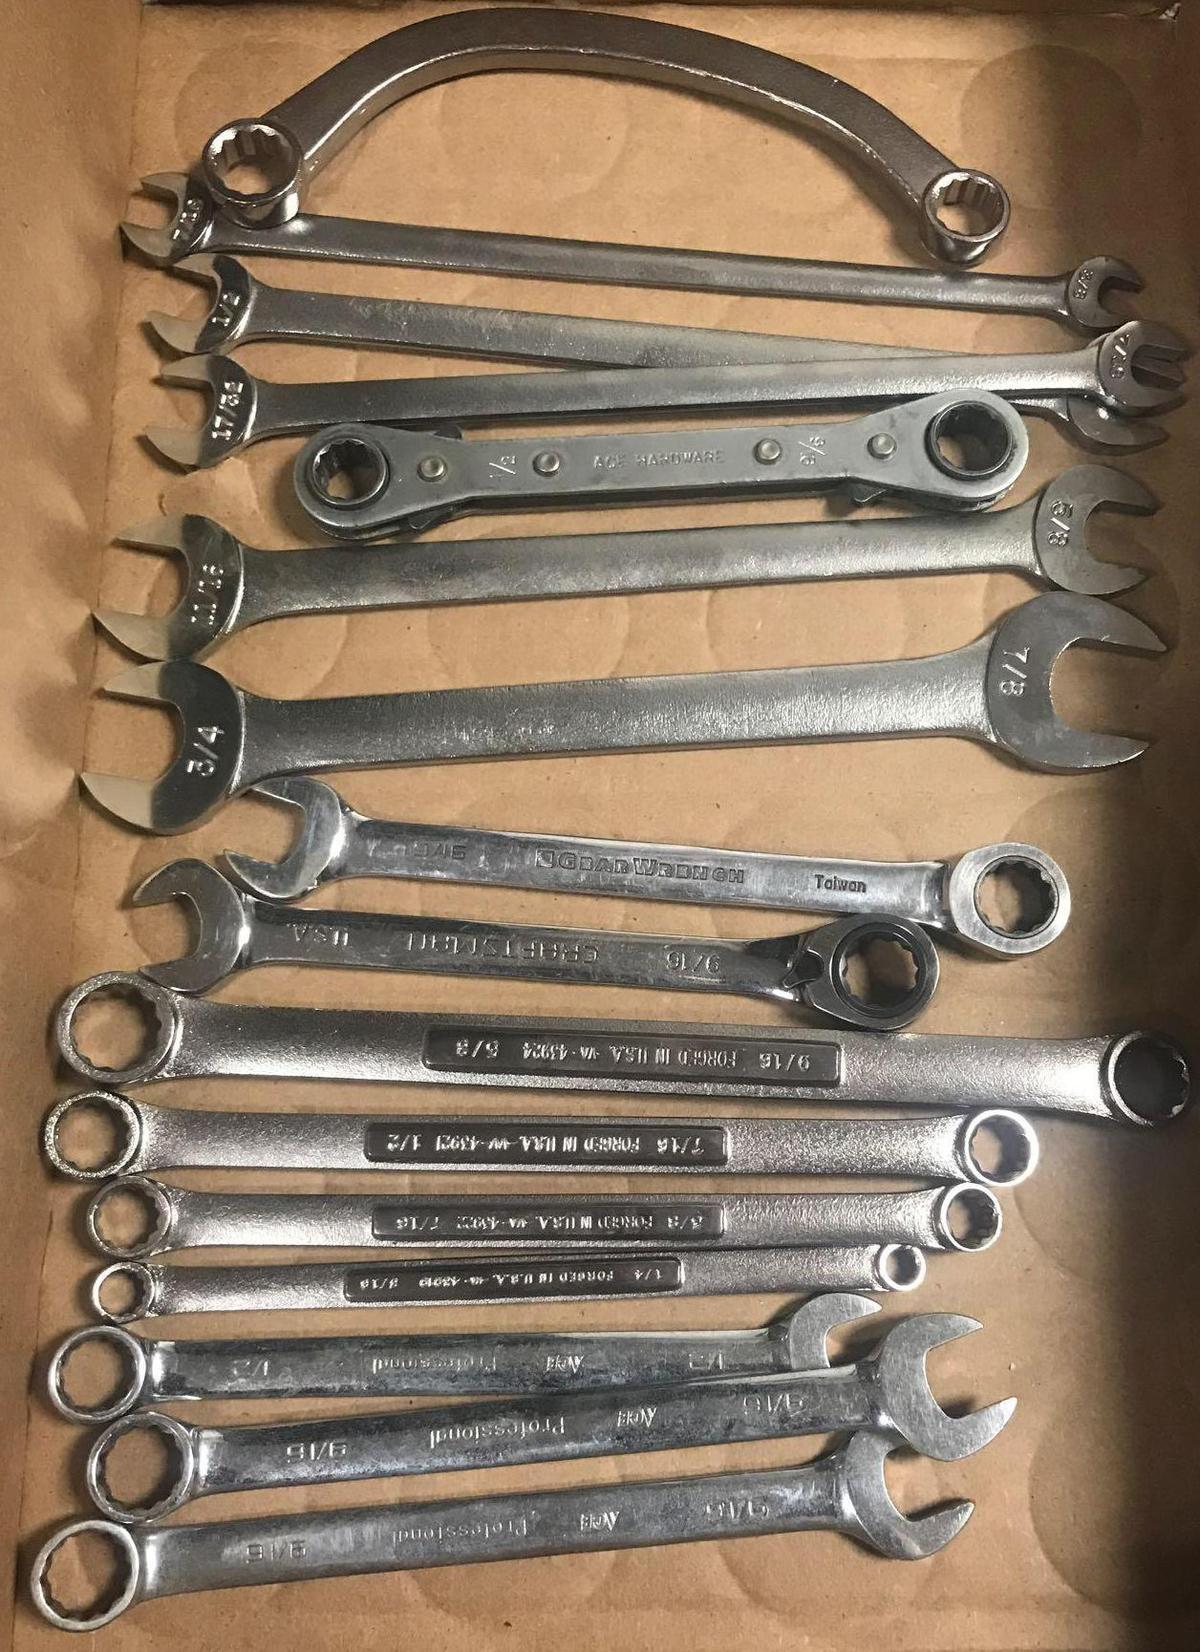 Group of 16 wrenches